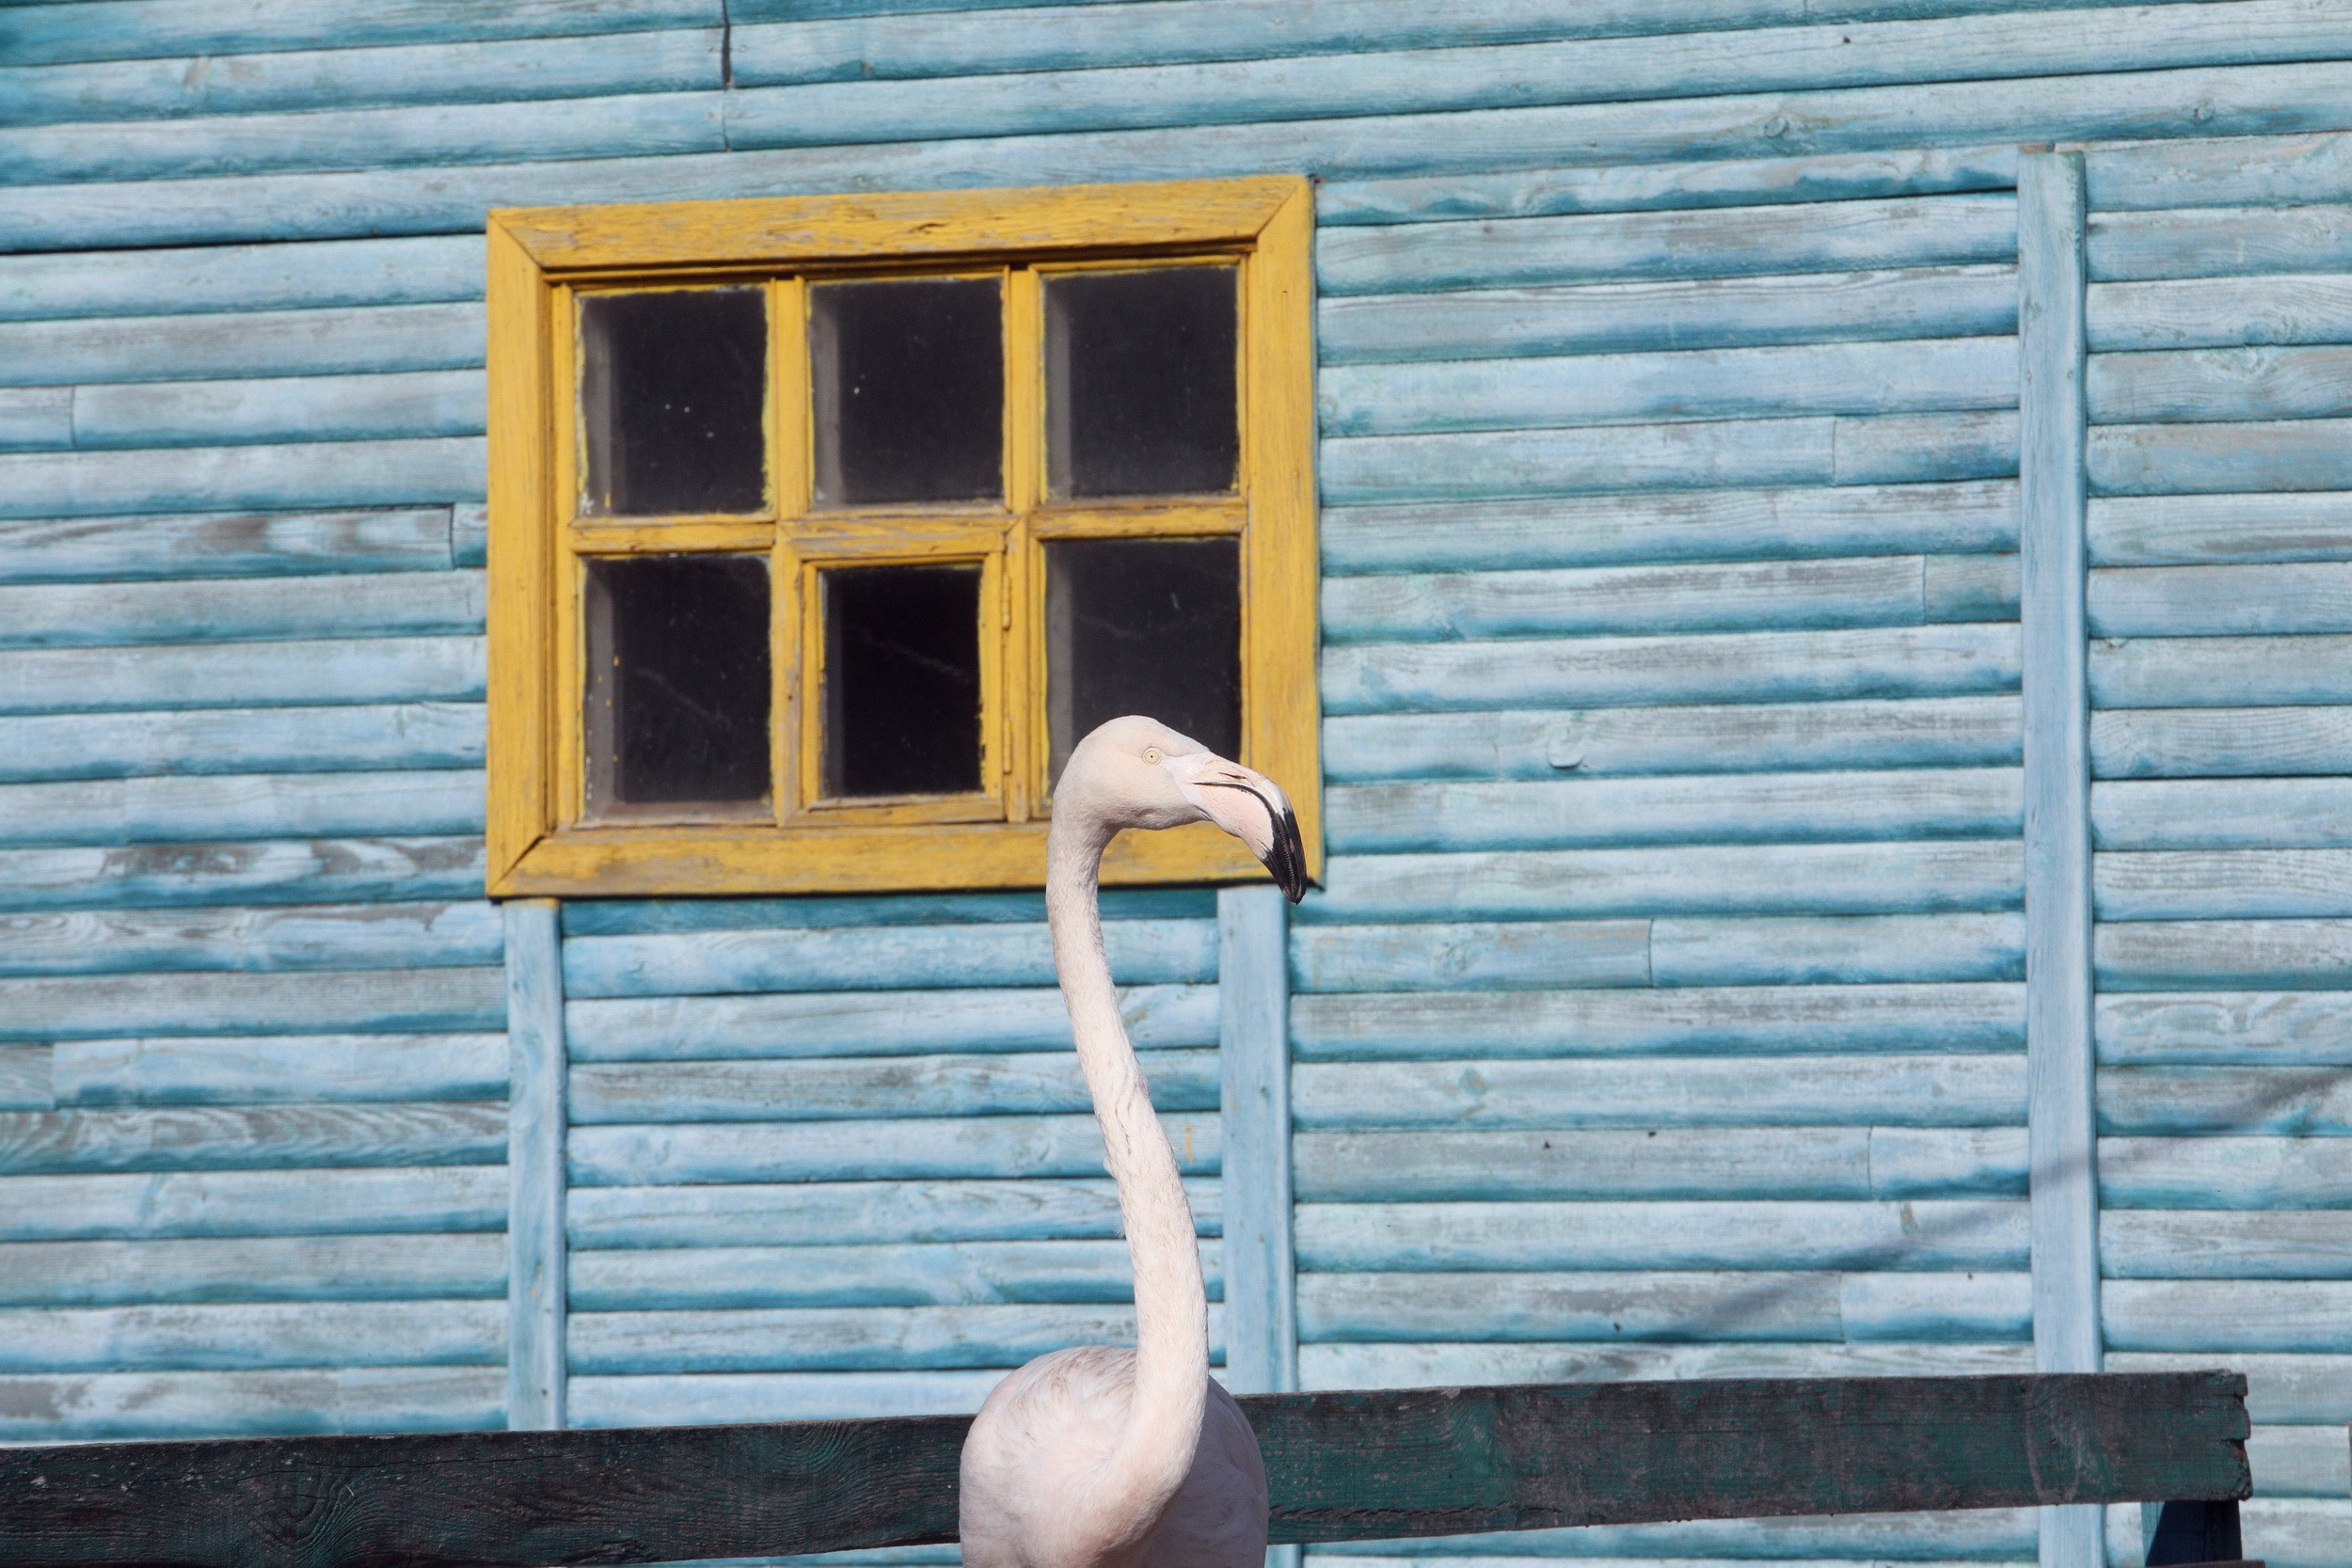 A flamingo in its pen at the wildlife private zoo located at the Ostrich Valley farm in Yasnohorodka village of Kyiv Oblast. ( by Volodymyr Petrov)